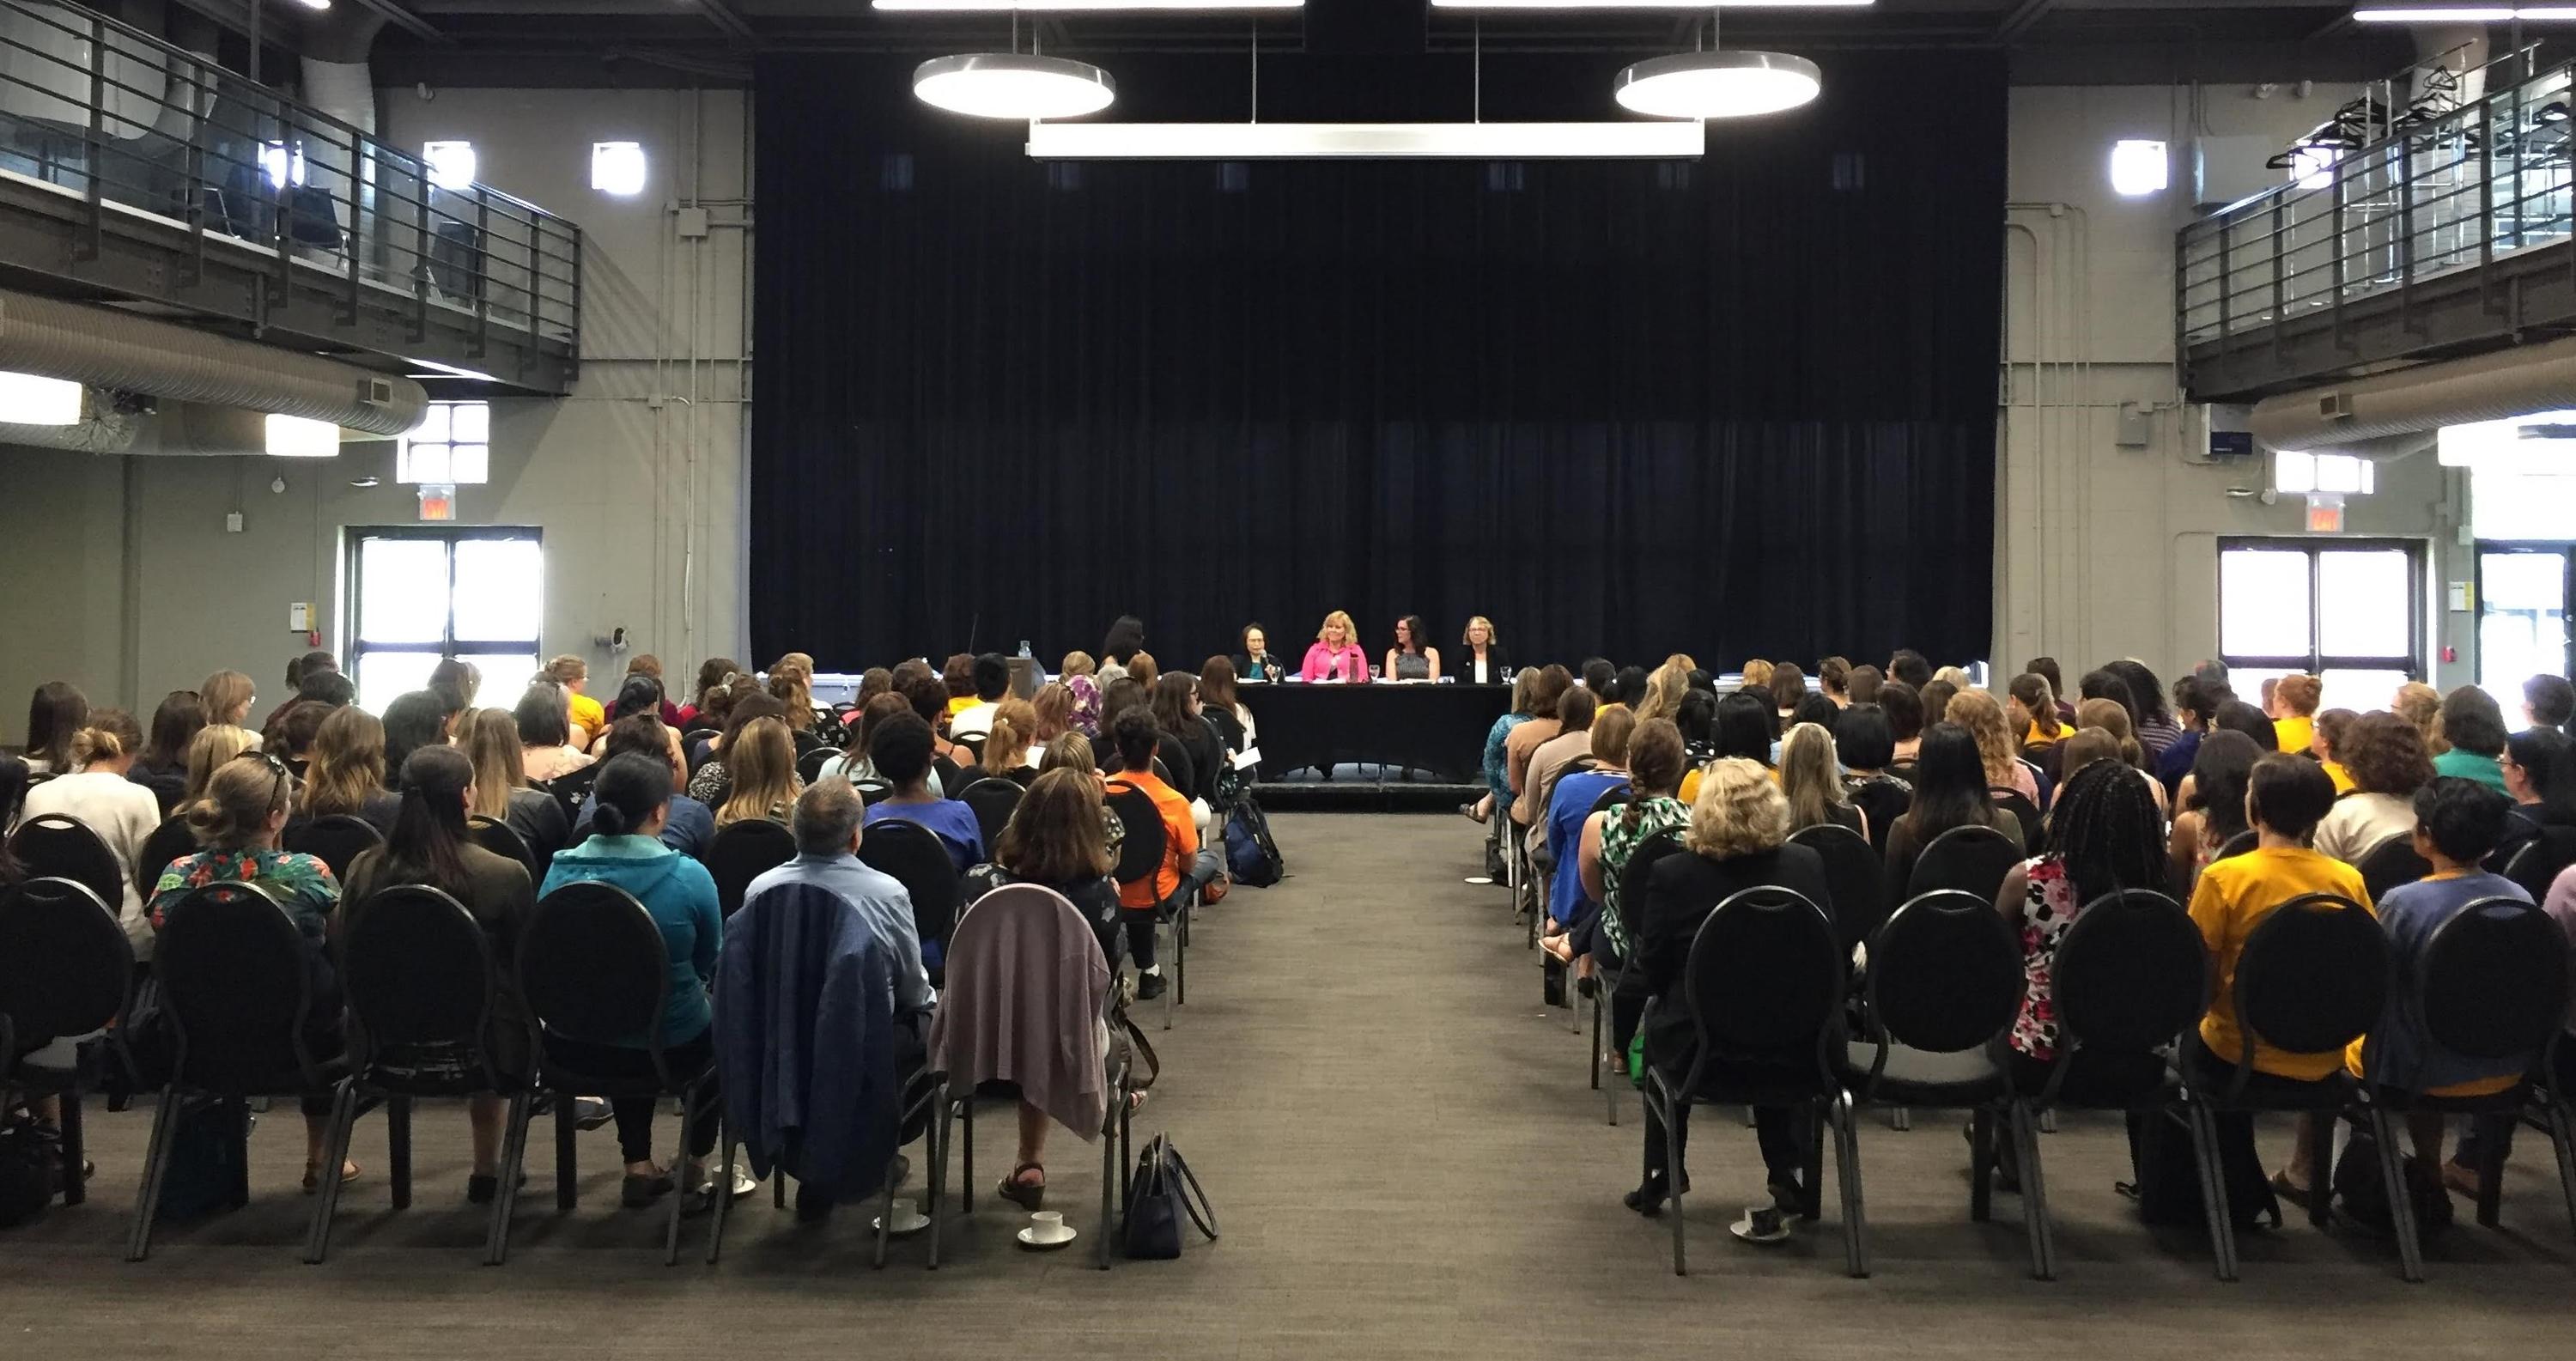 Four women speaking on a panel to a large audience